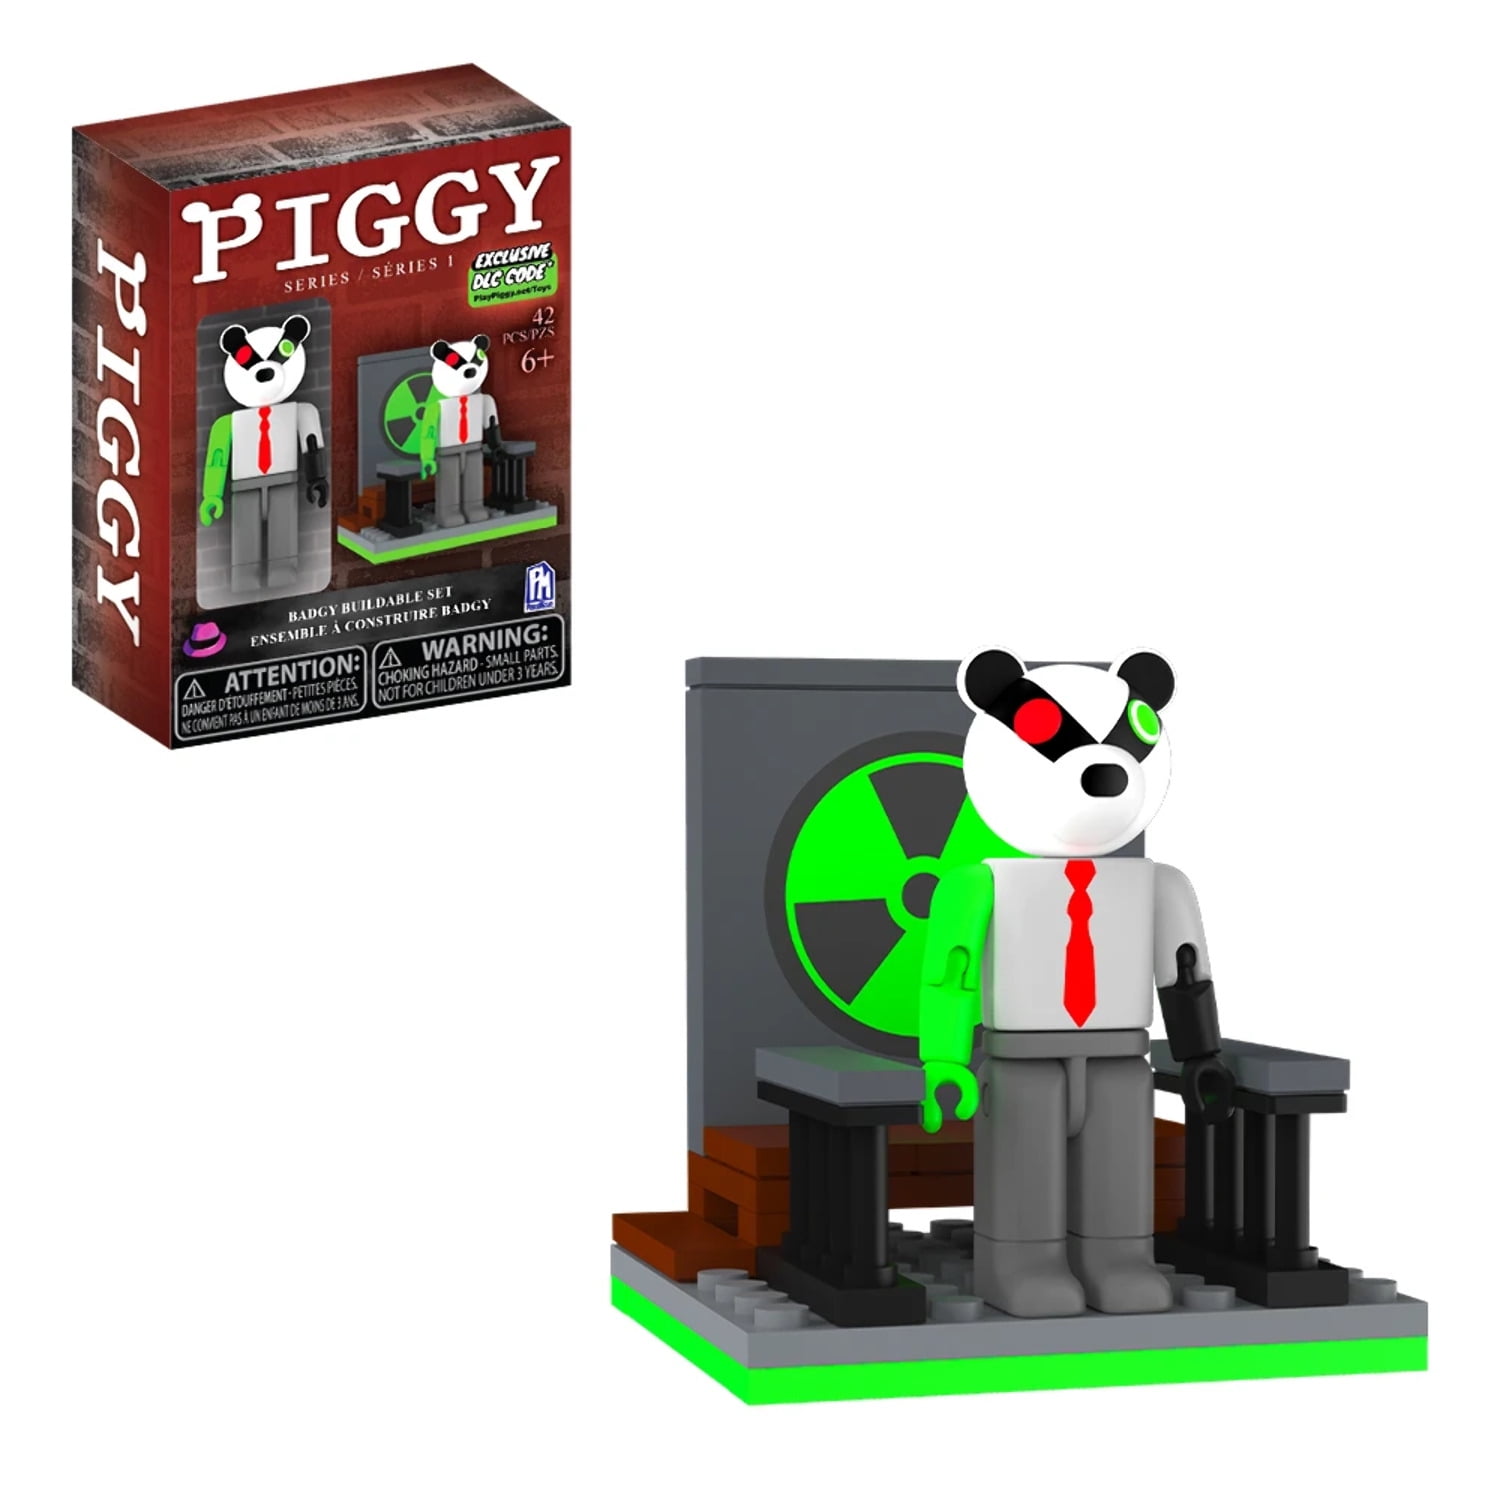 Piggy Toy Heads Piggy Toys fits Roblox and Lego Bodies 